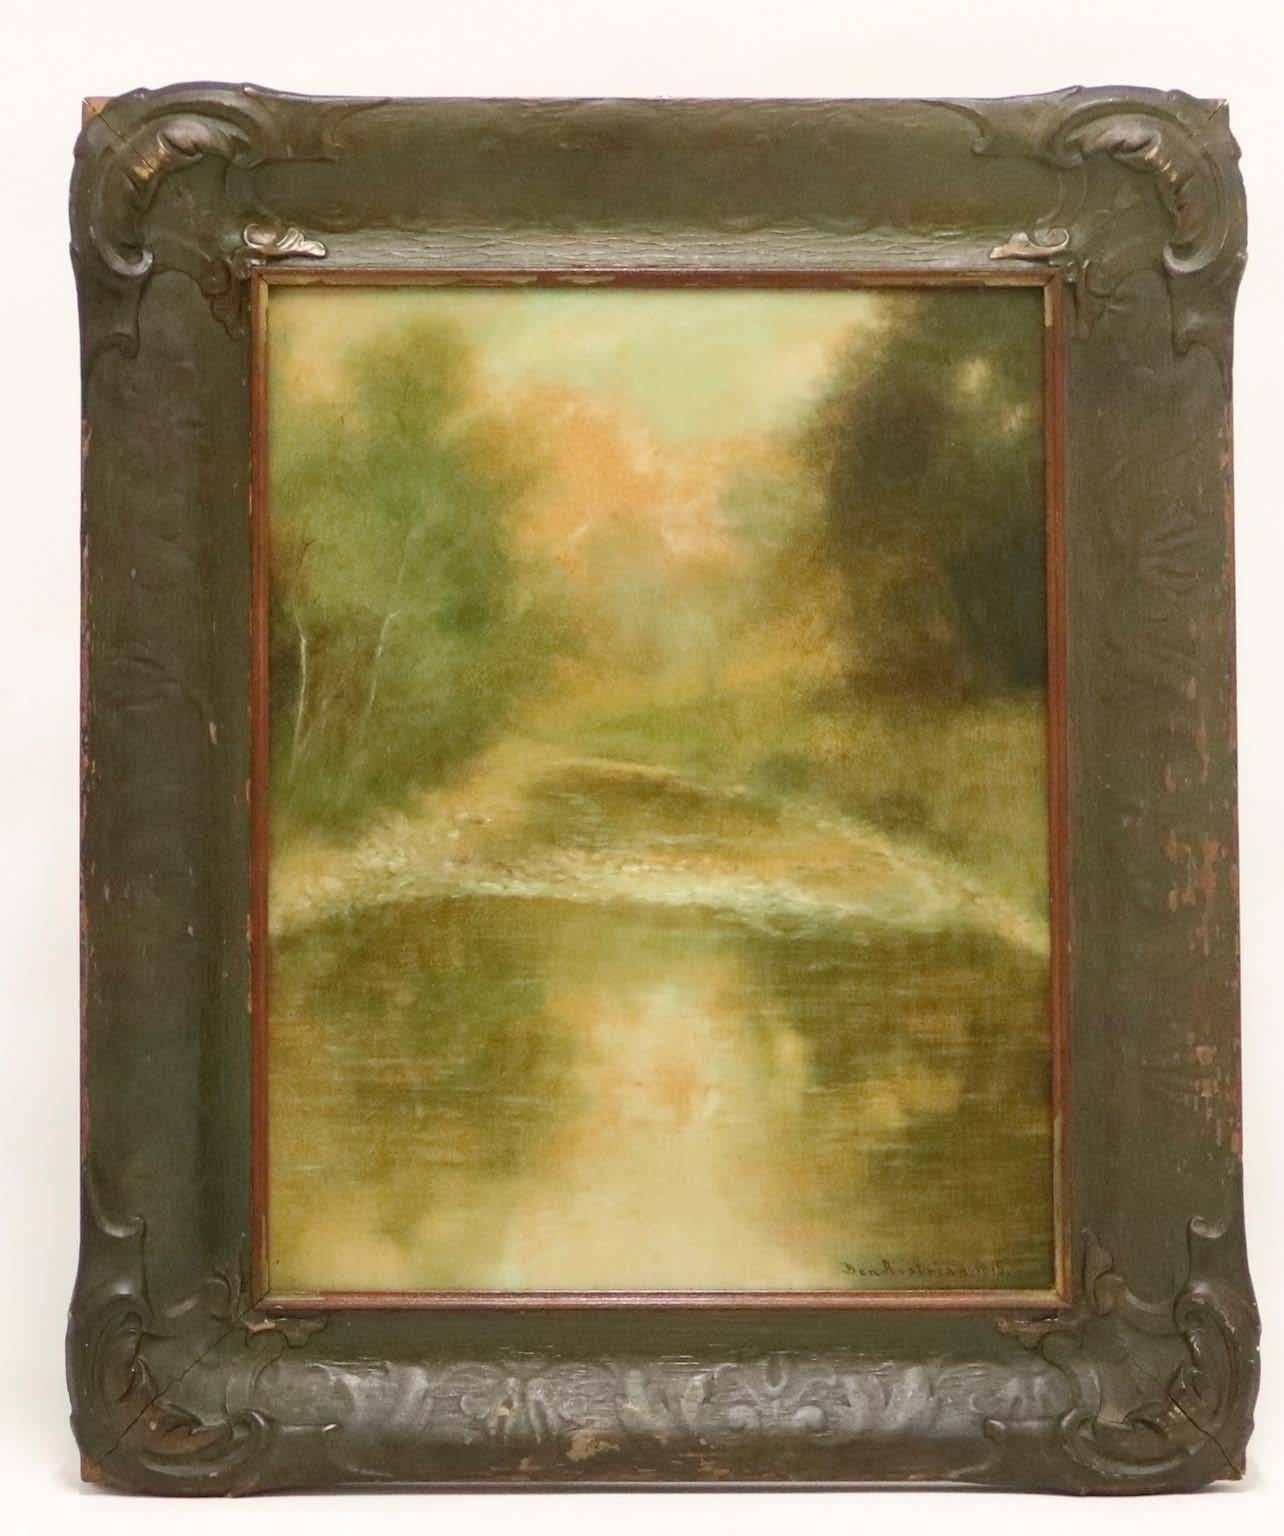 Ben Austrian (American, 1870–1921) oil on board, signed and dated 1915 depicting an impressionist landscape with lake. Framed and untouched, with inscription to the back by the artist.

Ben Austrian's painting career began by exhibiting a trompe